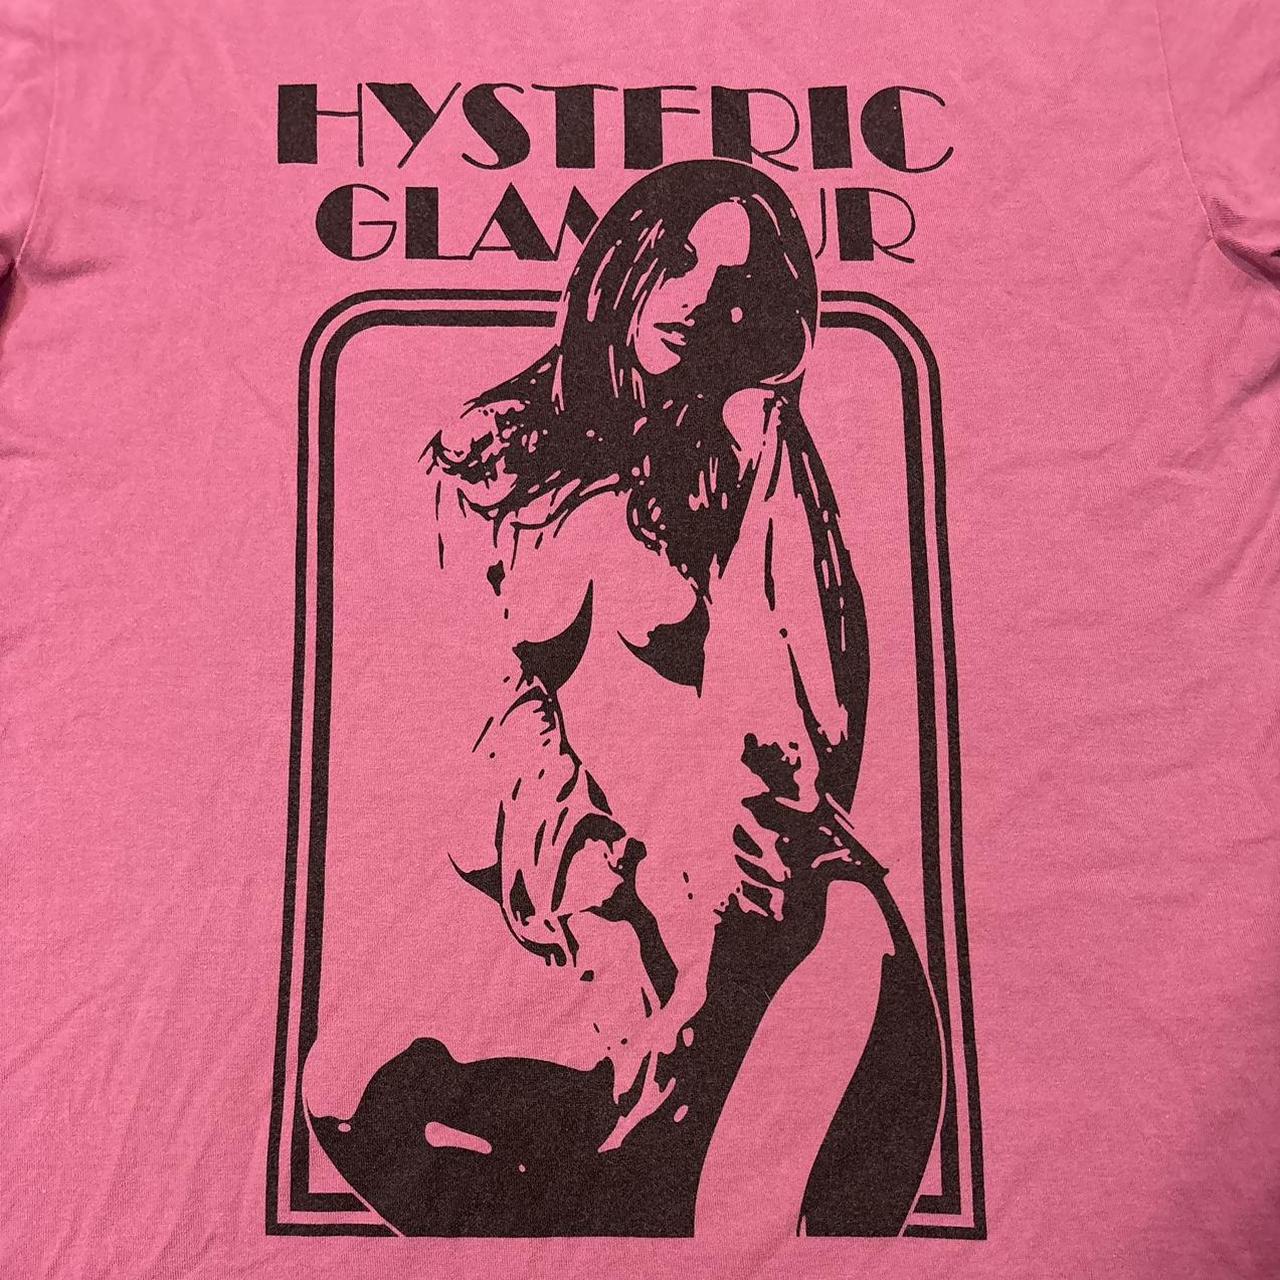 Cyber Y2K Hysteric Glamour Pink T Shirt!, This shirt